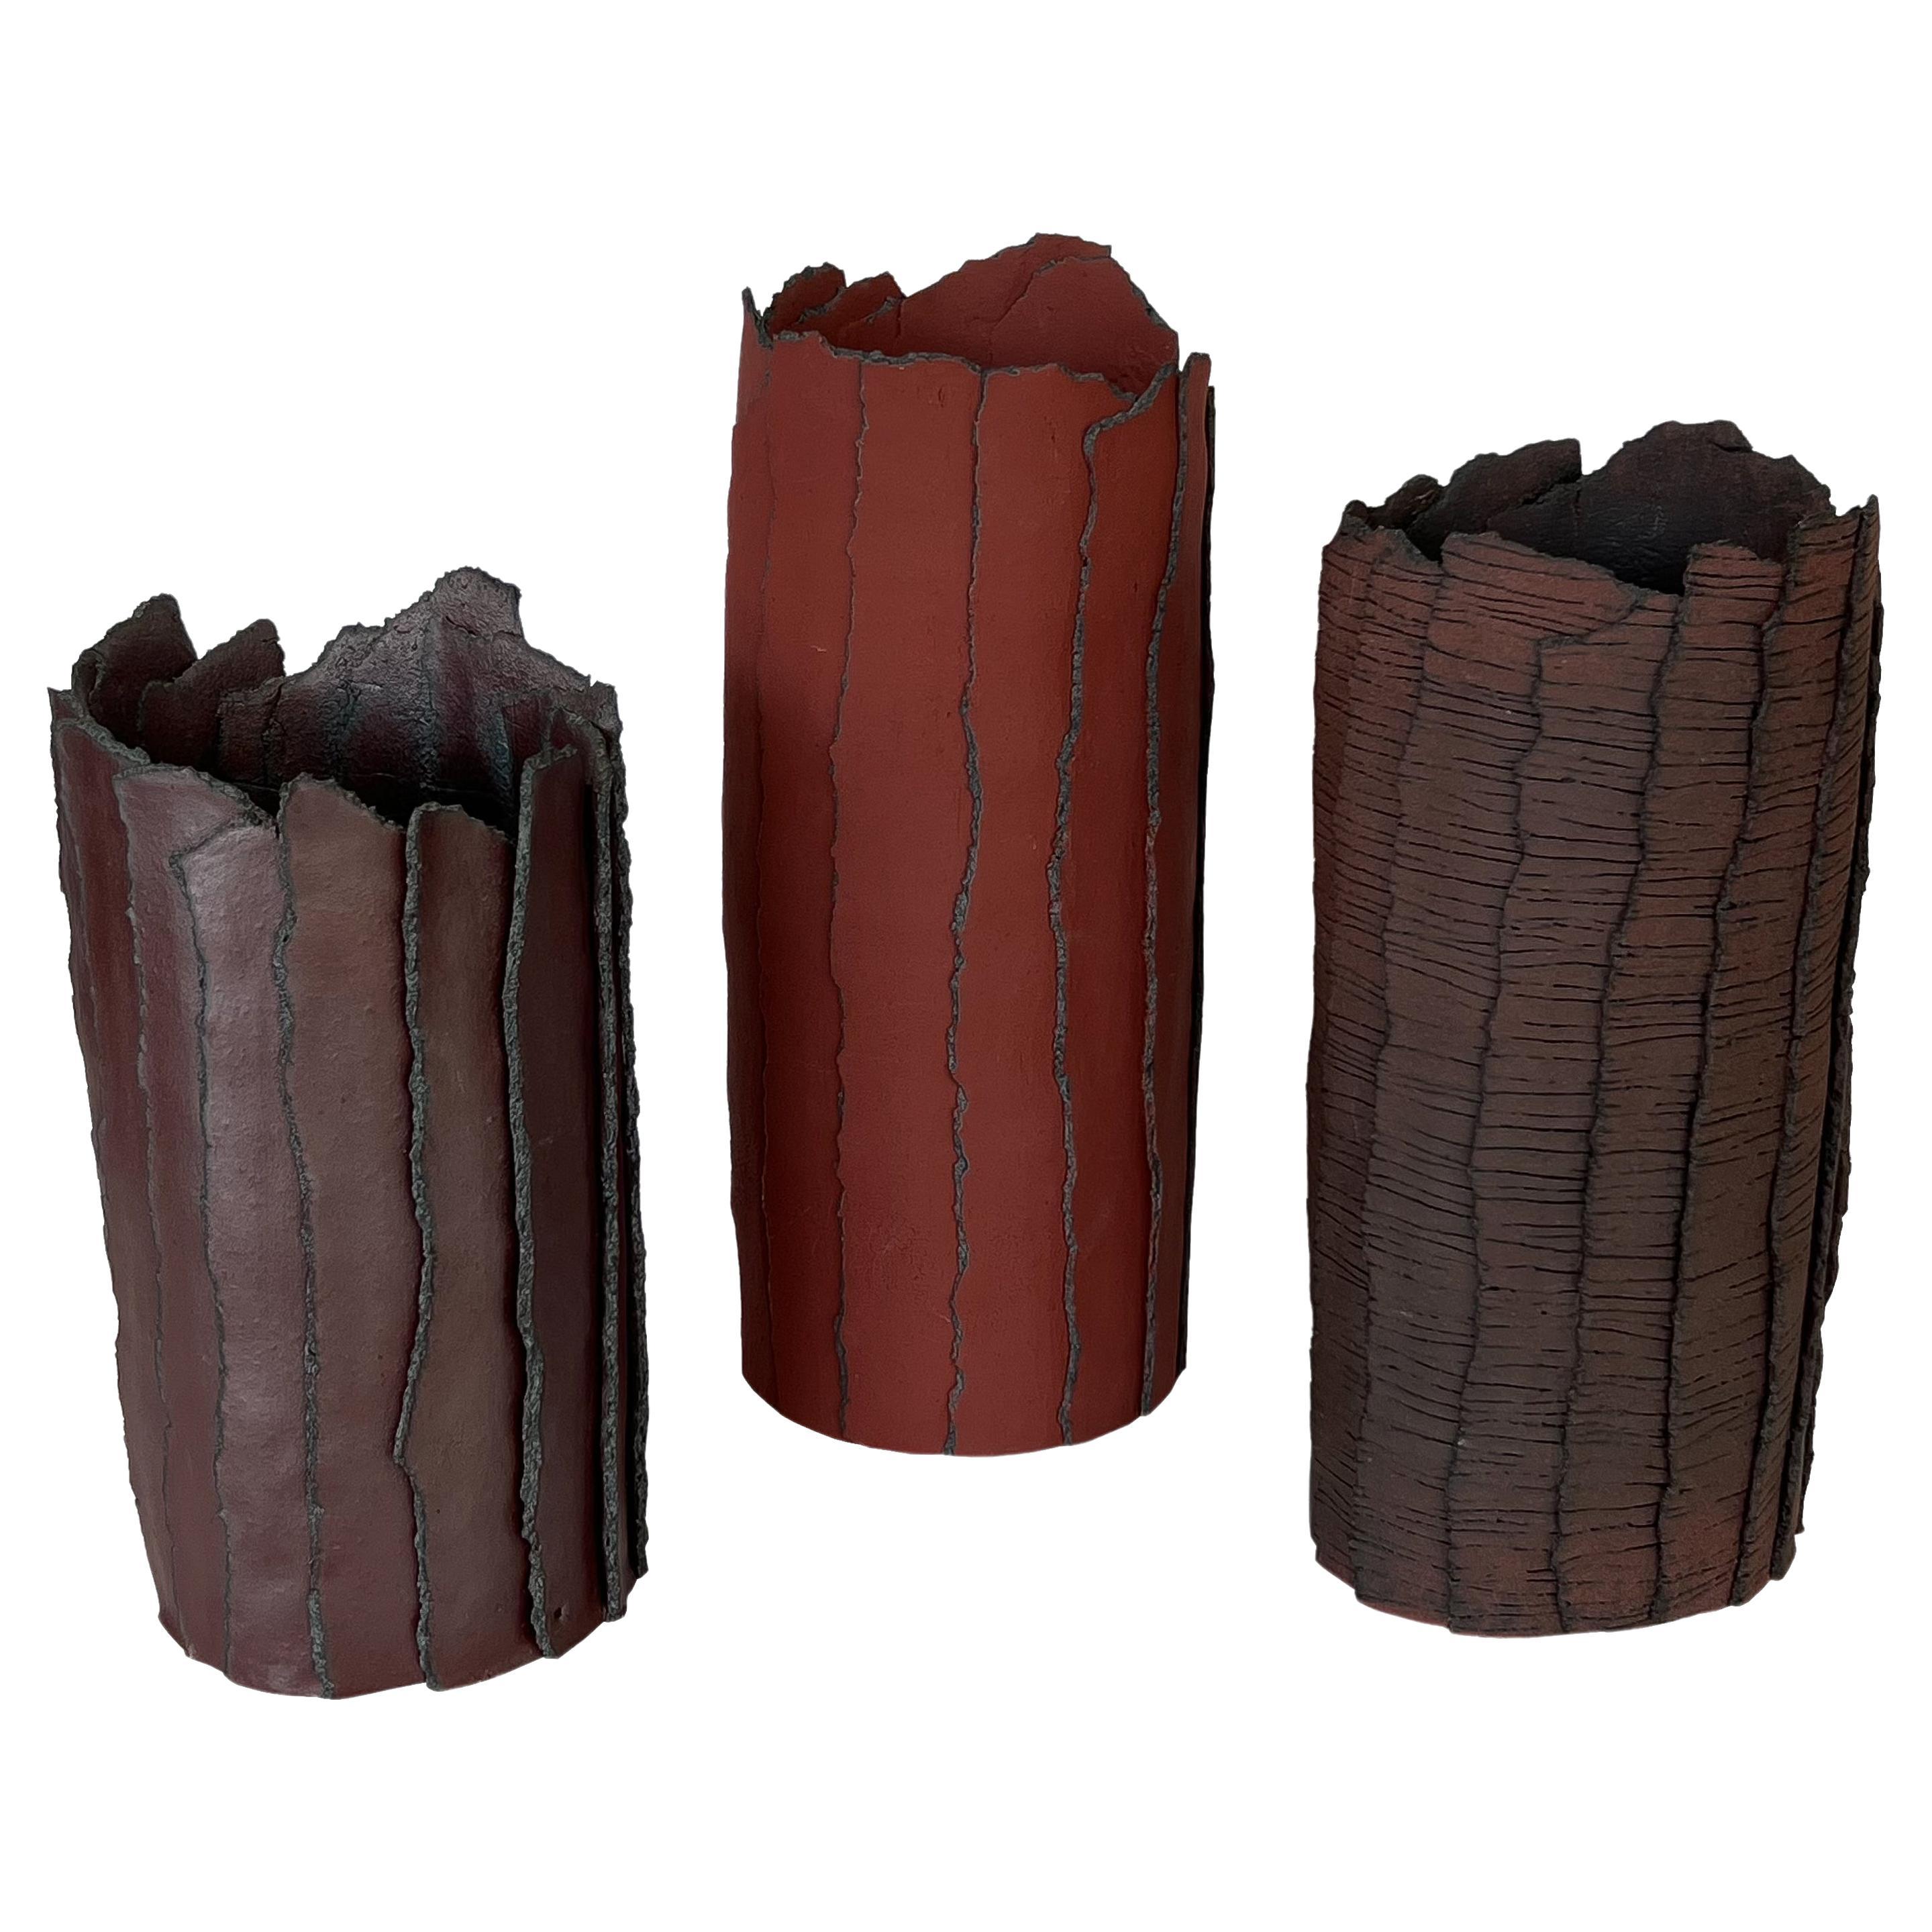 Set of 3 Brutalist Abstract Ceramic Cylinder Vases with Texture